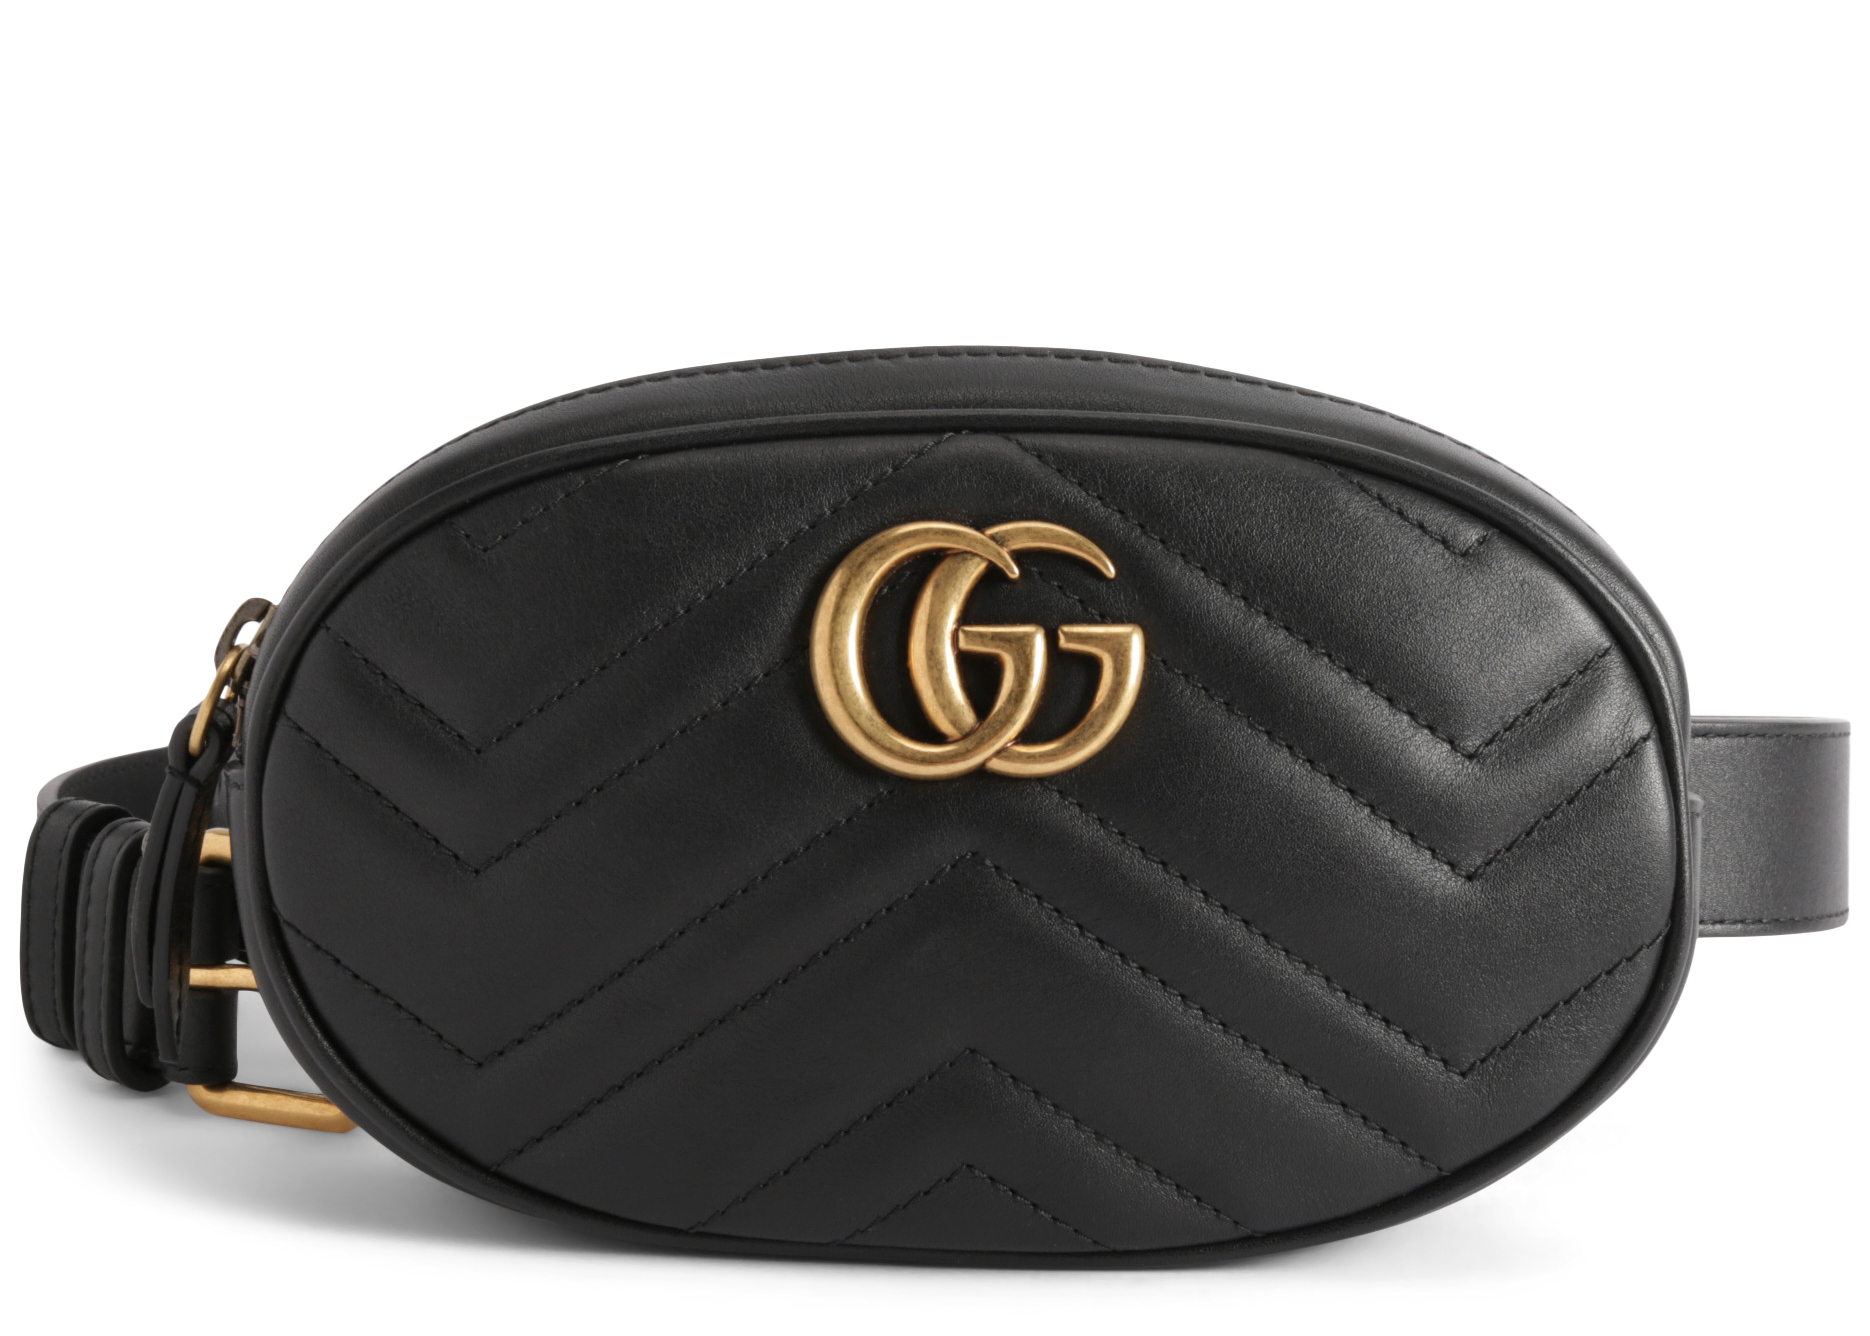 Gucci GG Marmont Belt Bag Matelasse Black in Calfskin with Gold